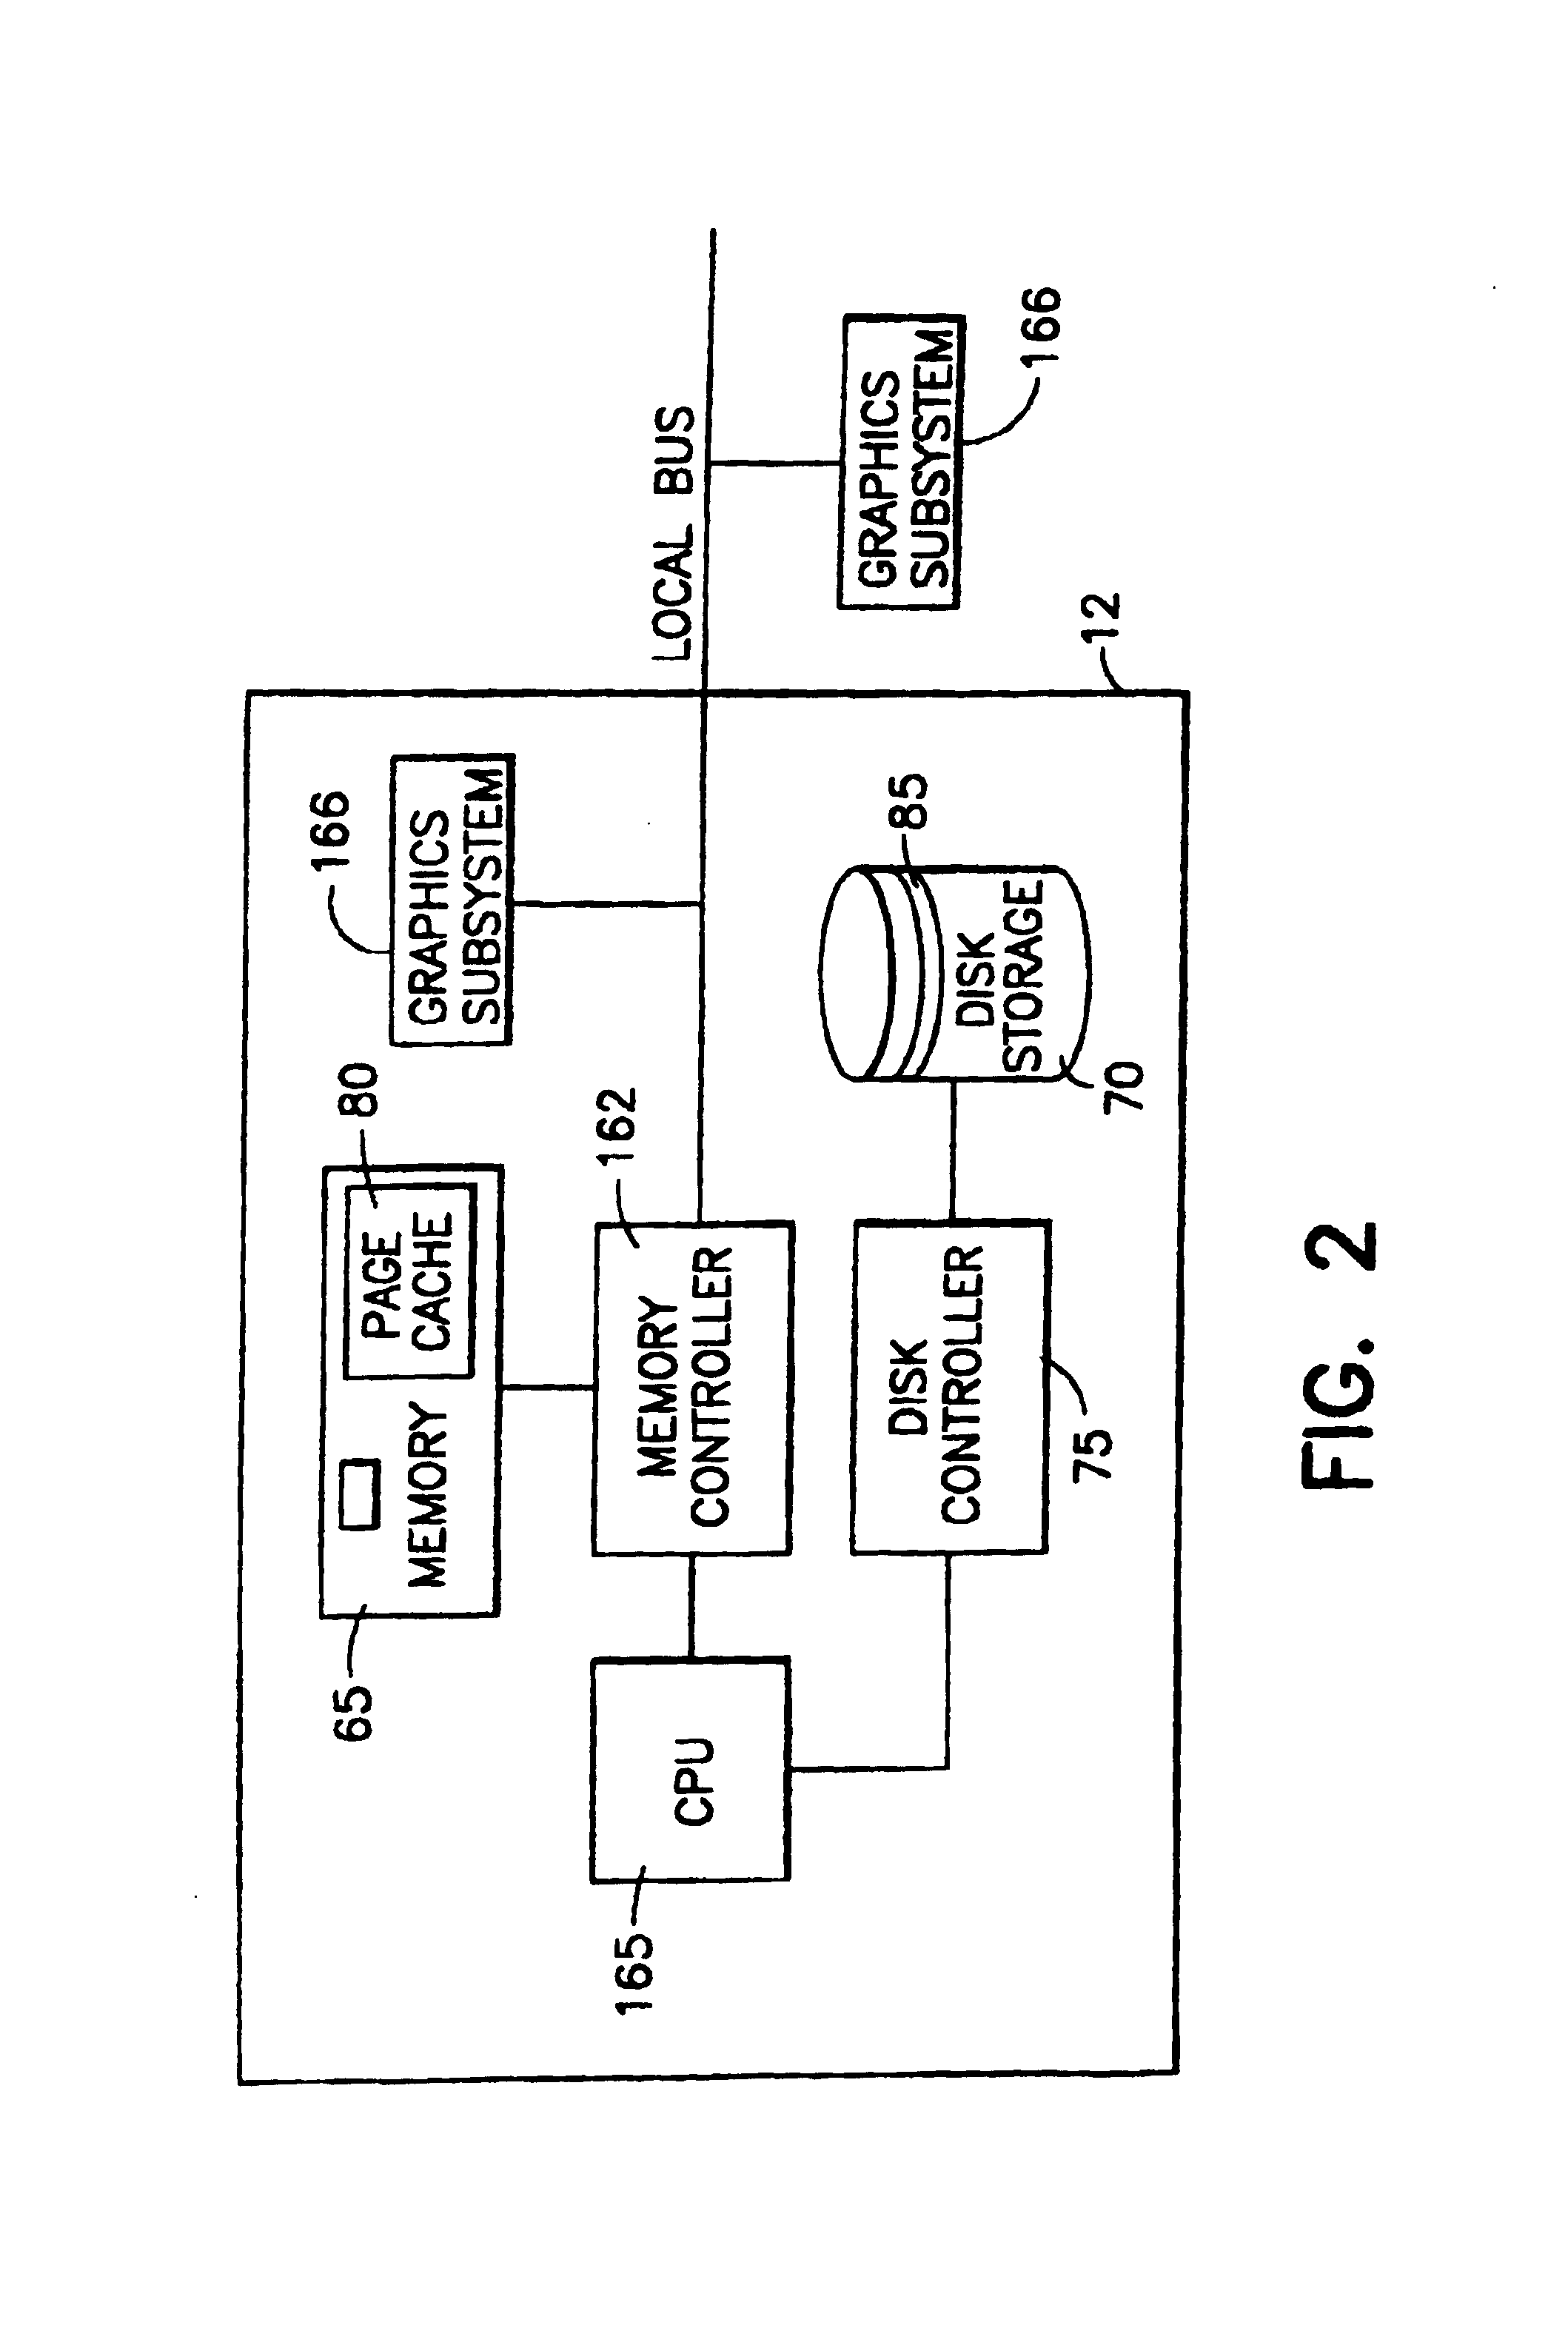 System and method for optimizing computer software and hardware